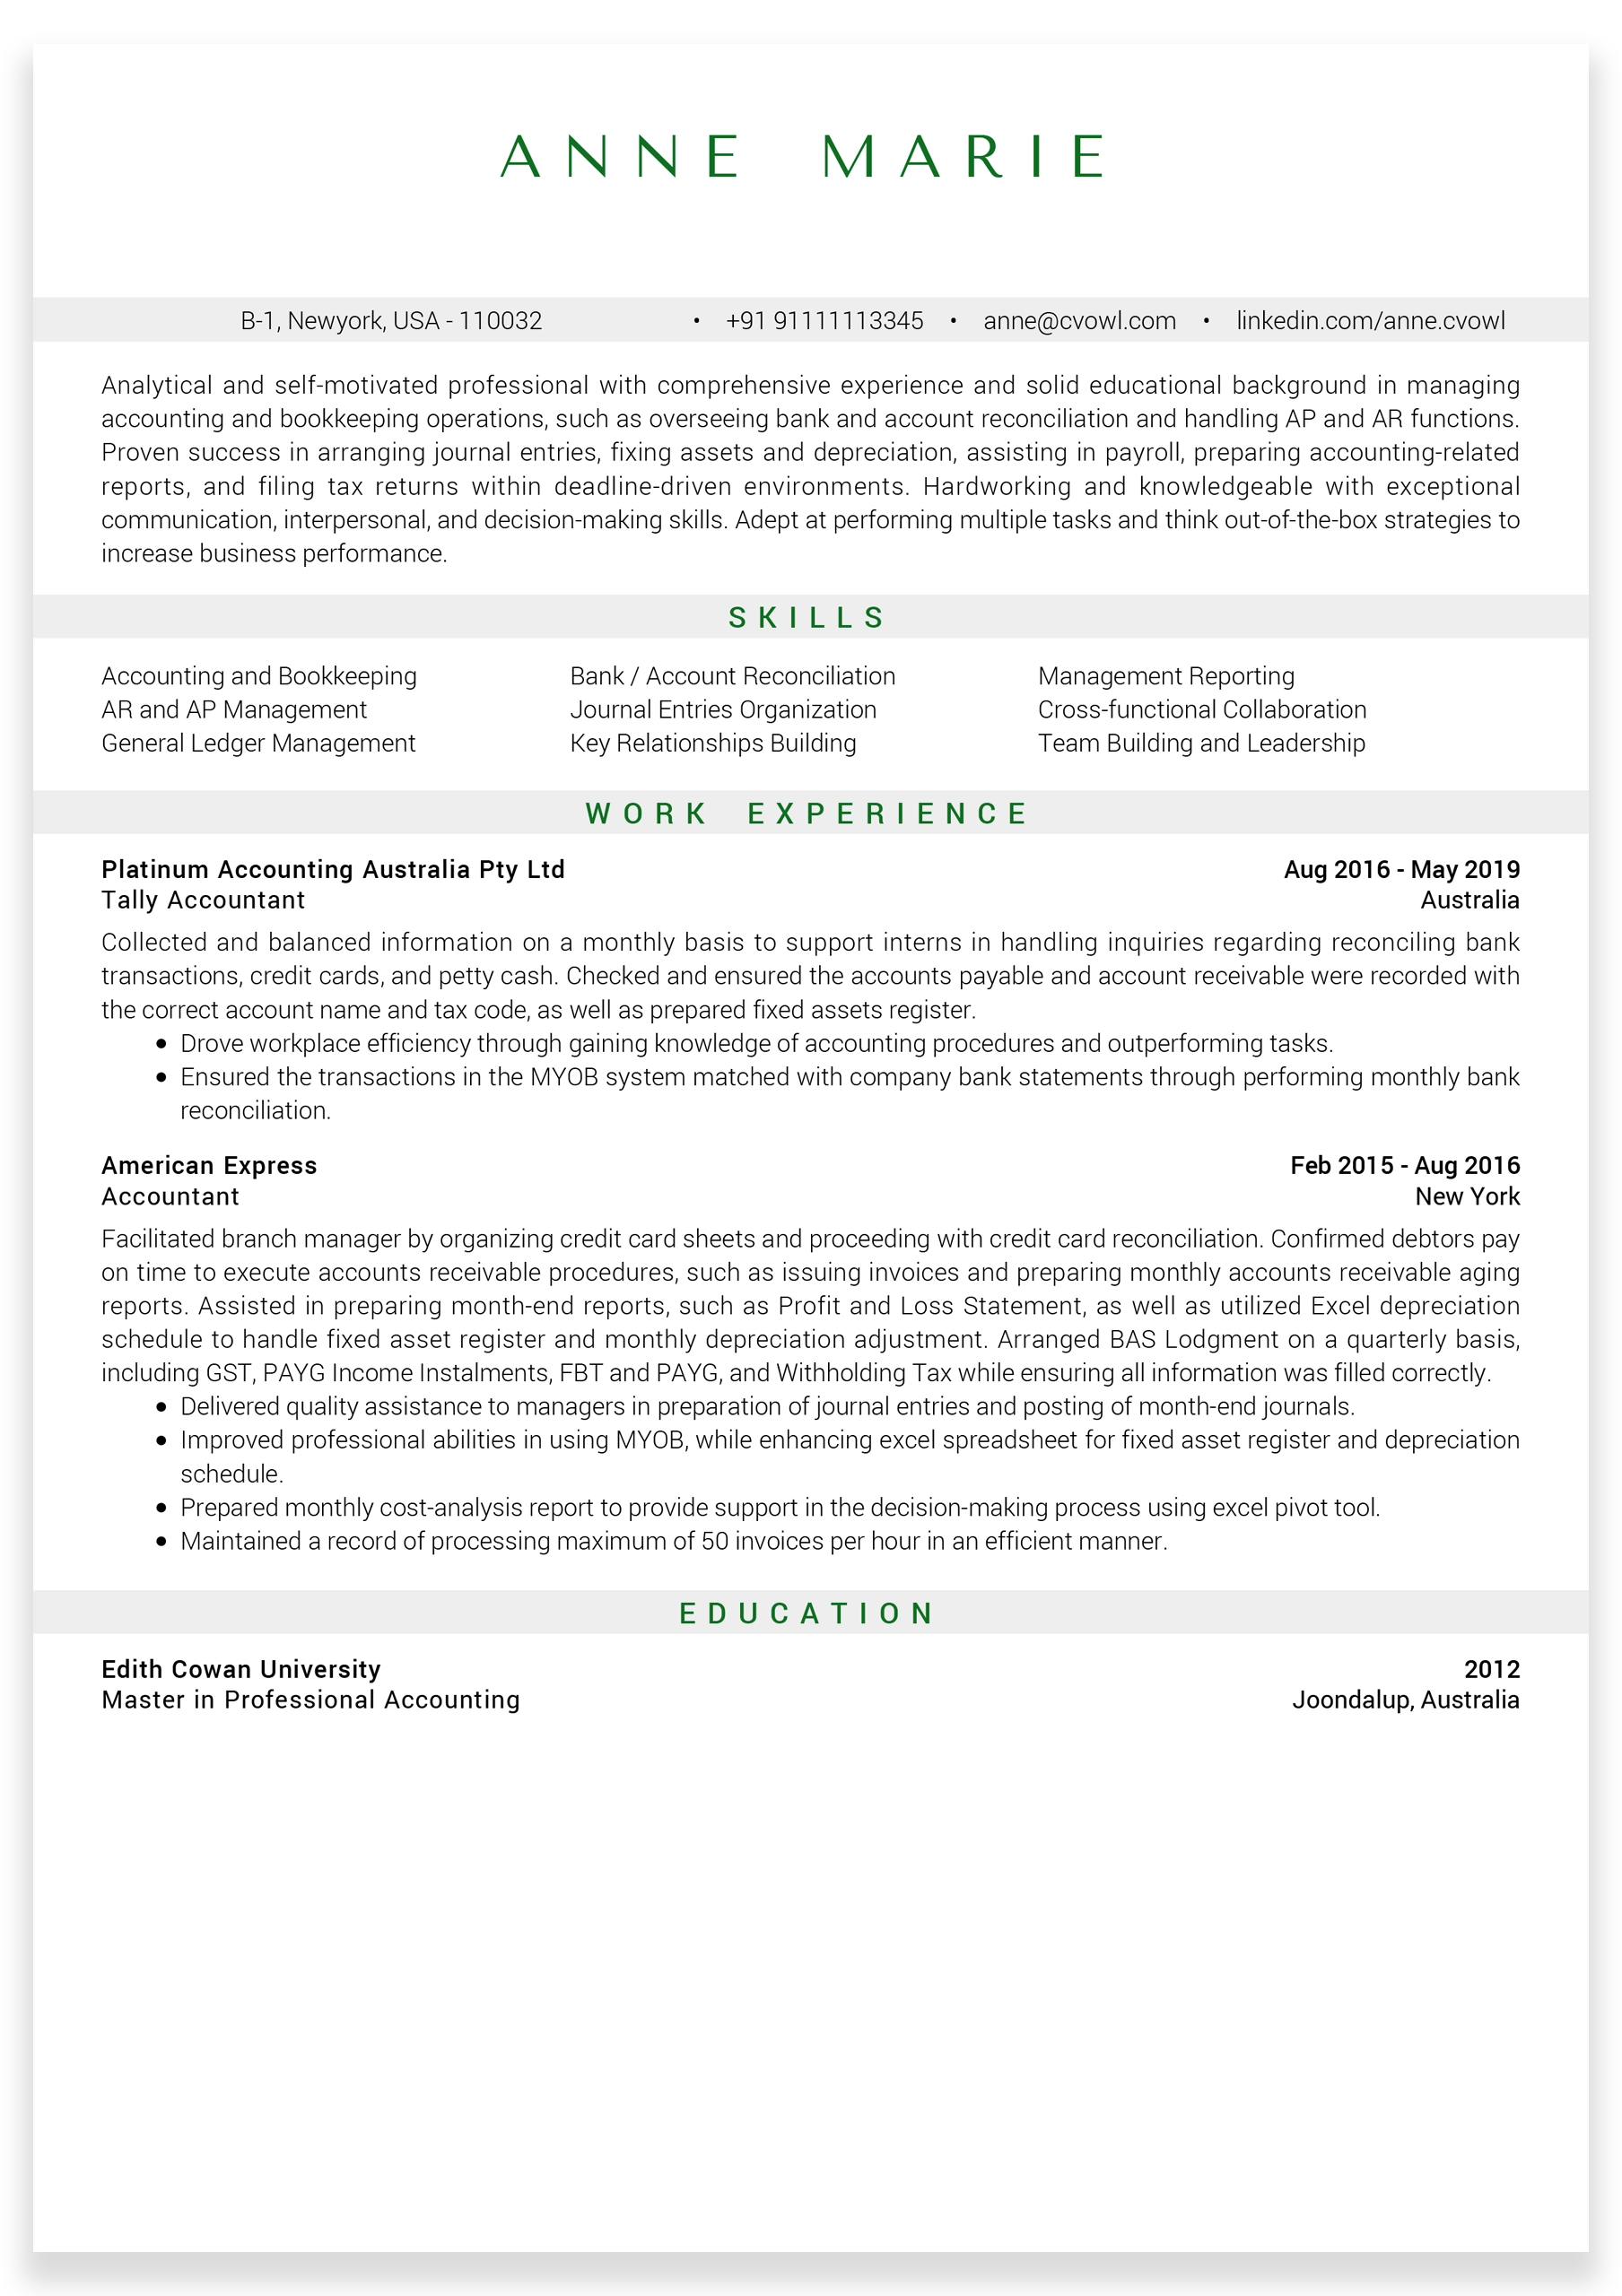 Content-Manager-Resume-sample2